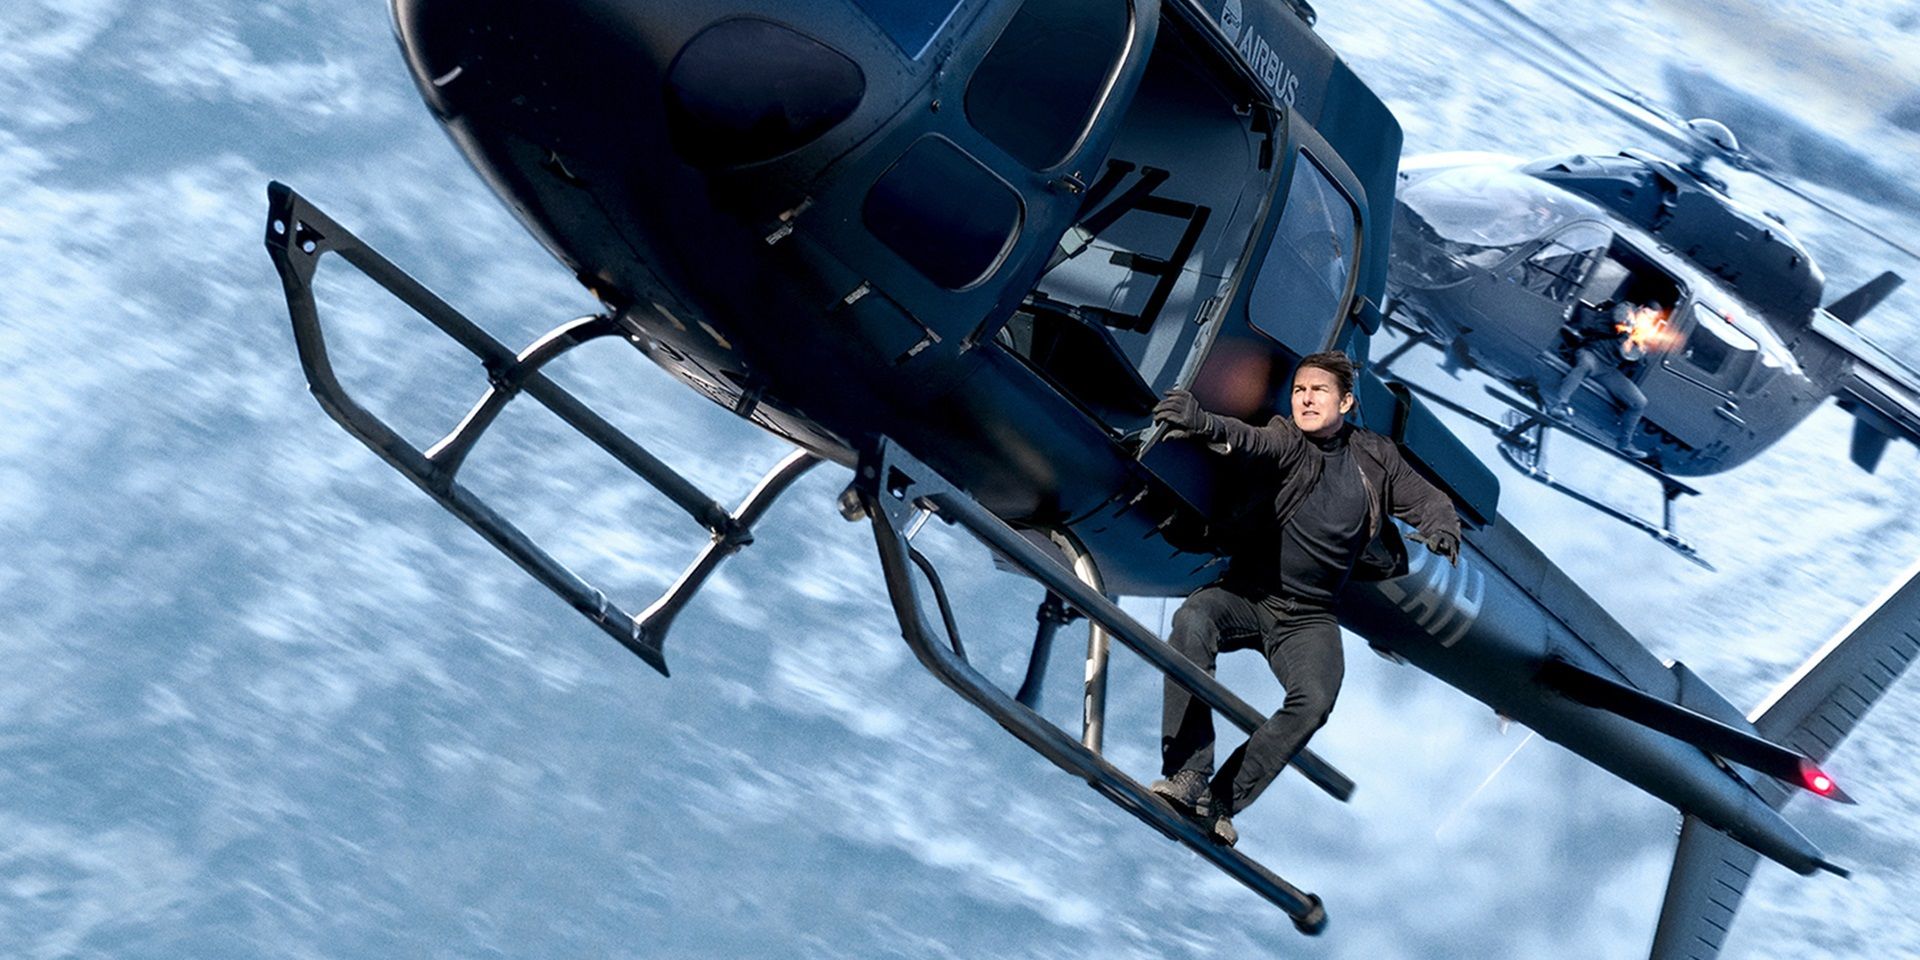 Impossible 8 Wild Stunt Has Tom Cruise Walking Outside Plane Mid-Air